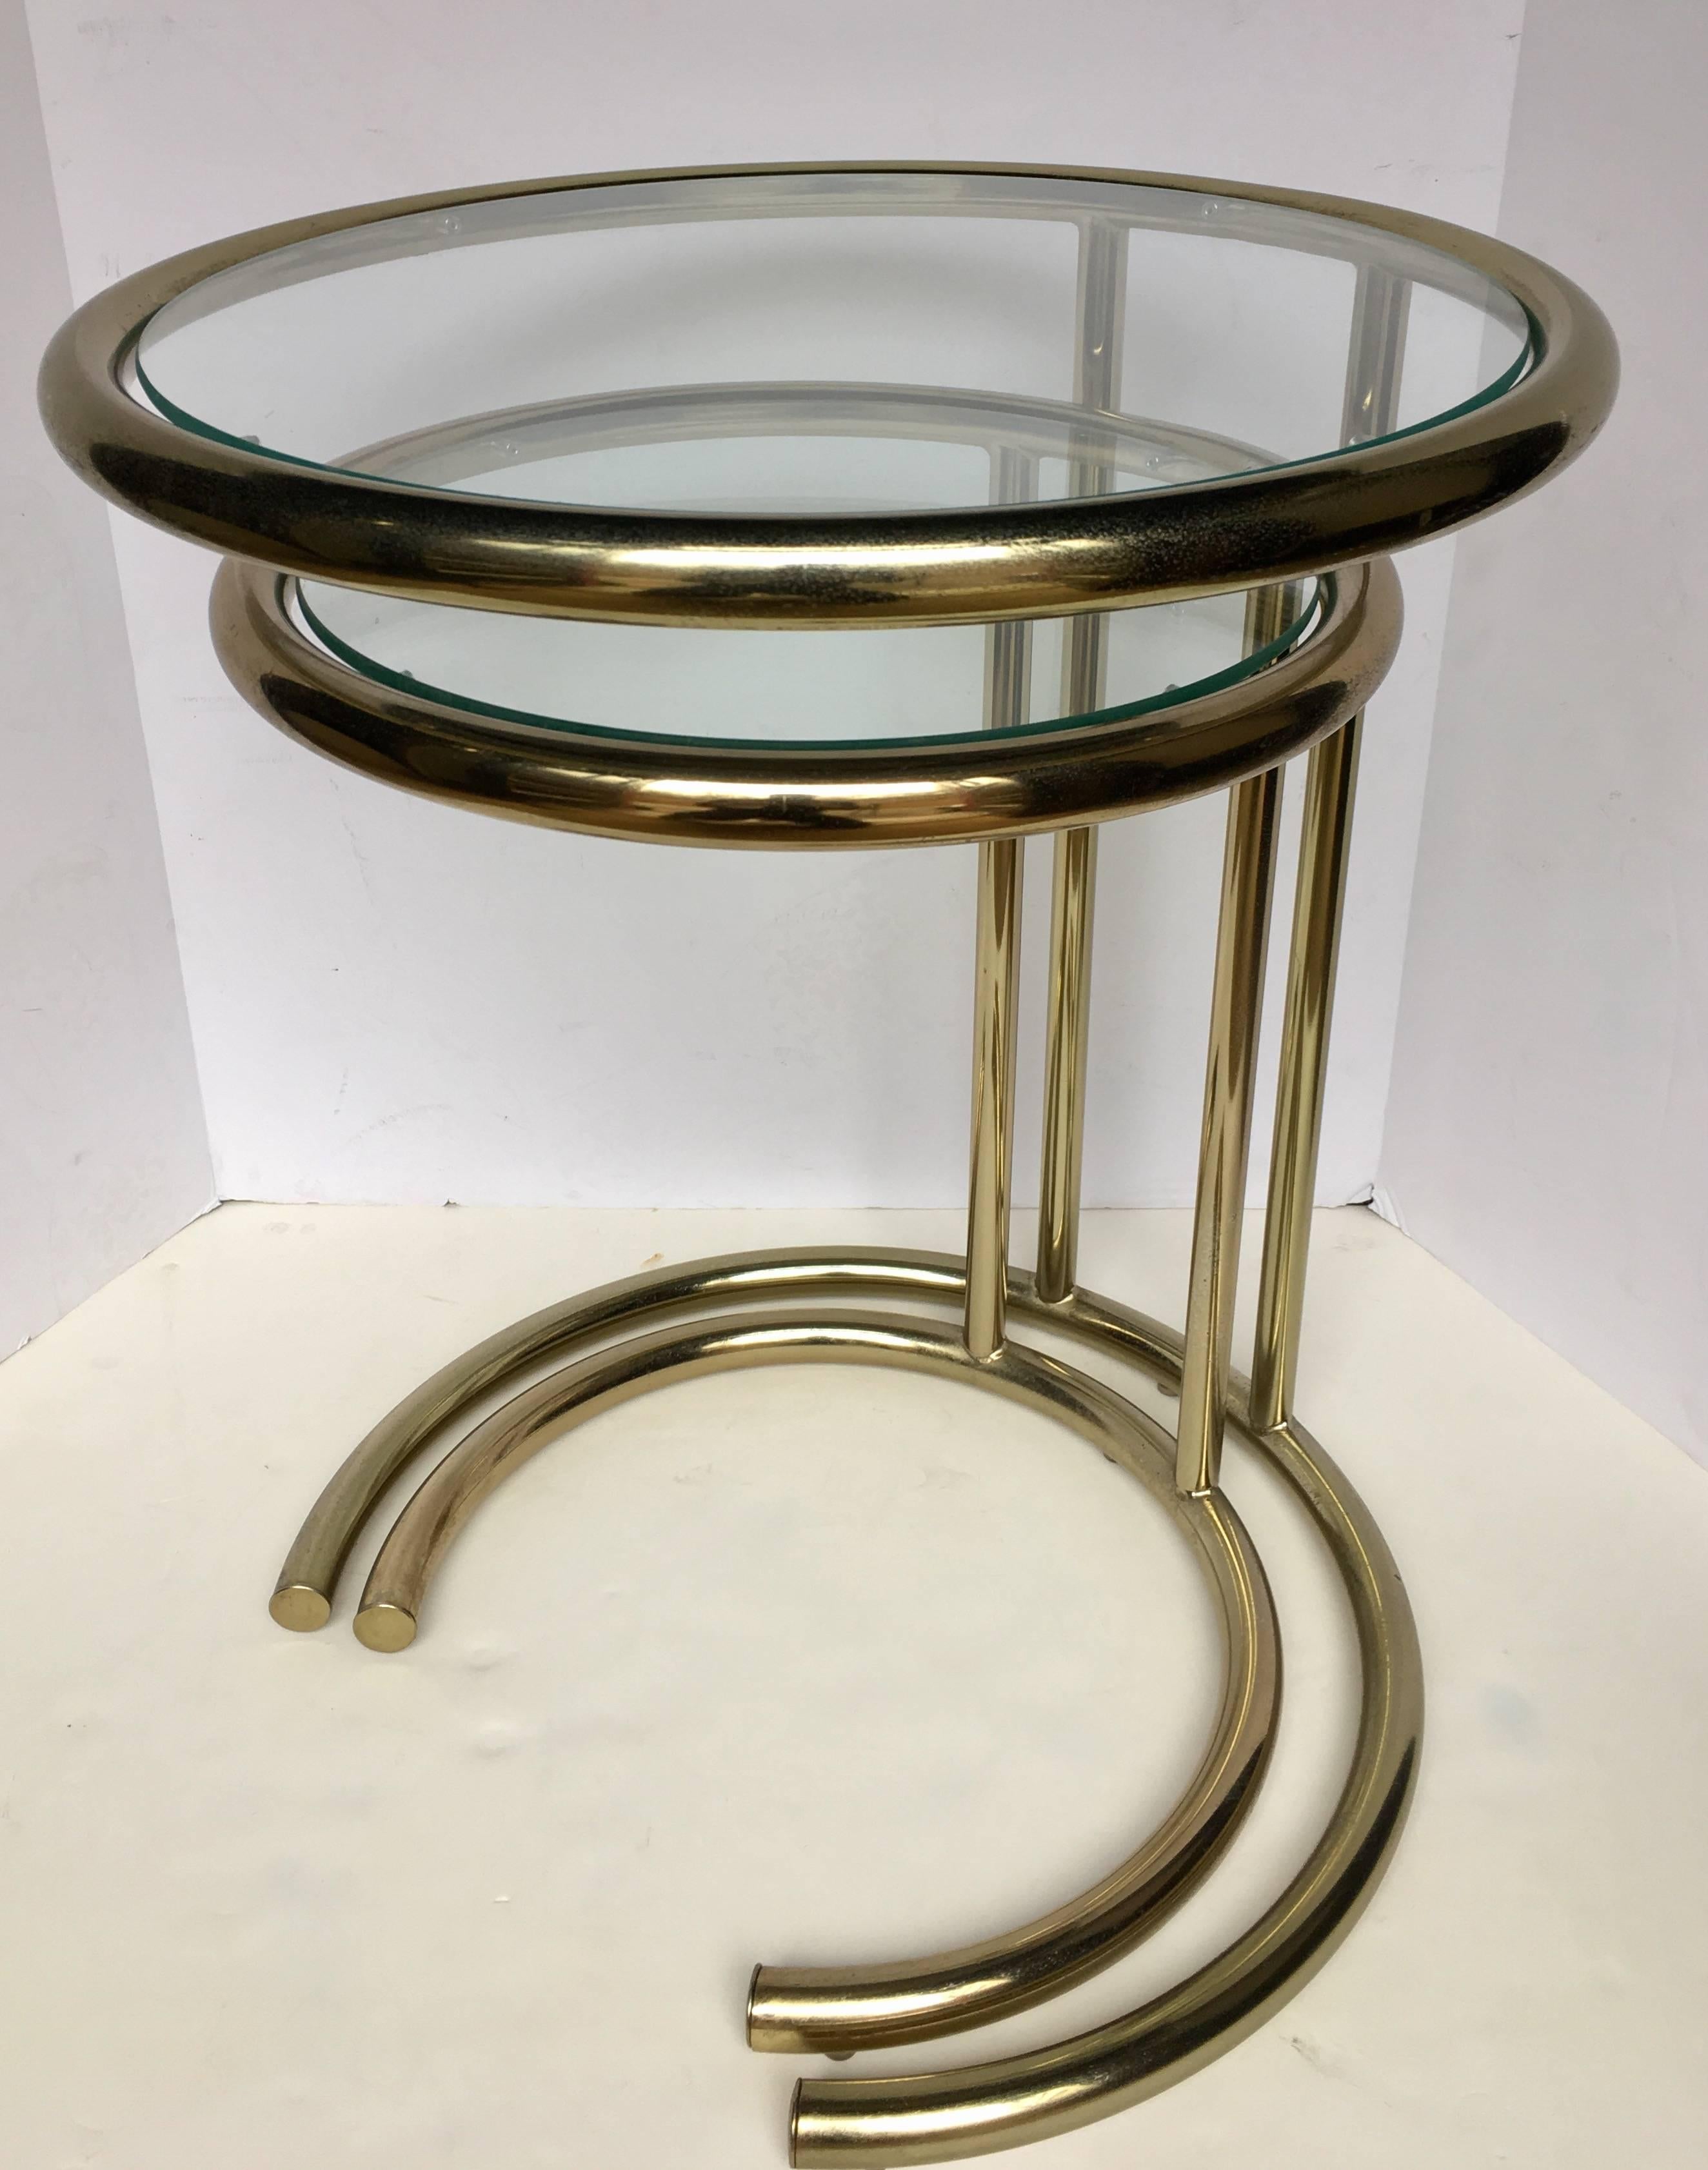 Set of two Mid-Century Modern brass-plated nesting accent tables in the style of Eileen Gray. Each end or side table features a tubular metal frame with removable round clear glass inserts. 

Large table: 21.5 H, 18 D
Small table: 19 H, 14.5 D.